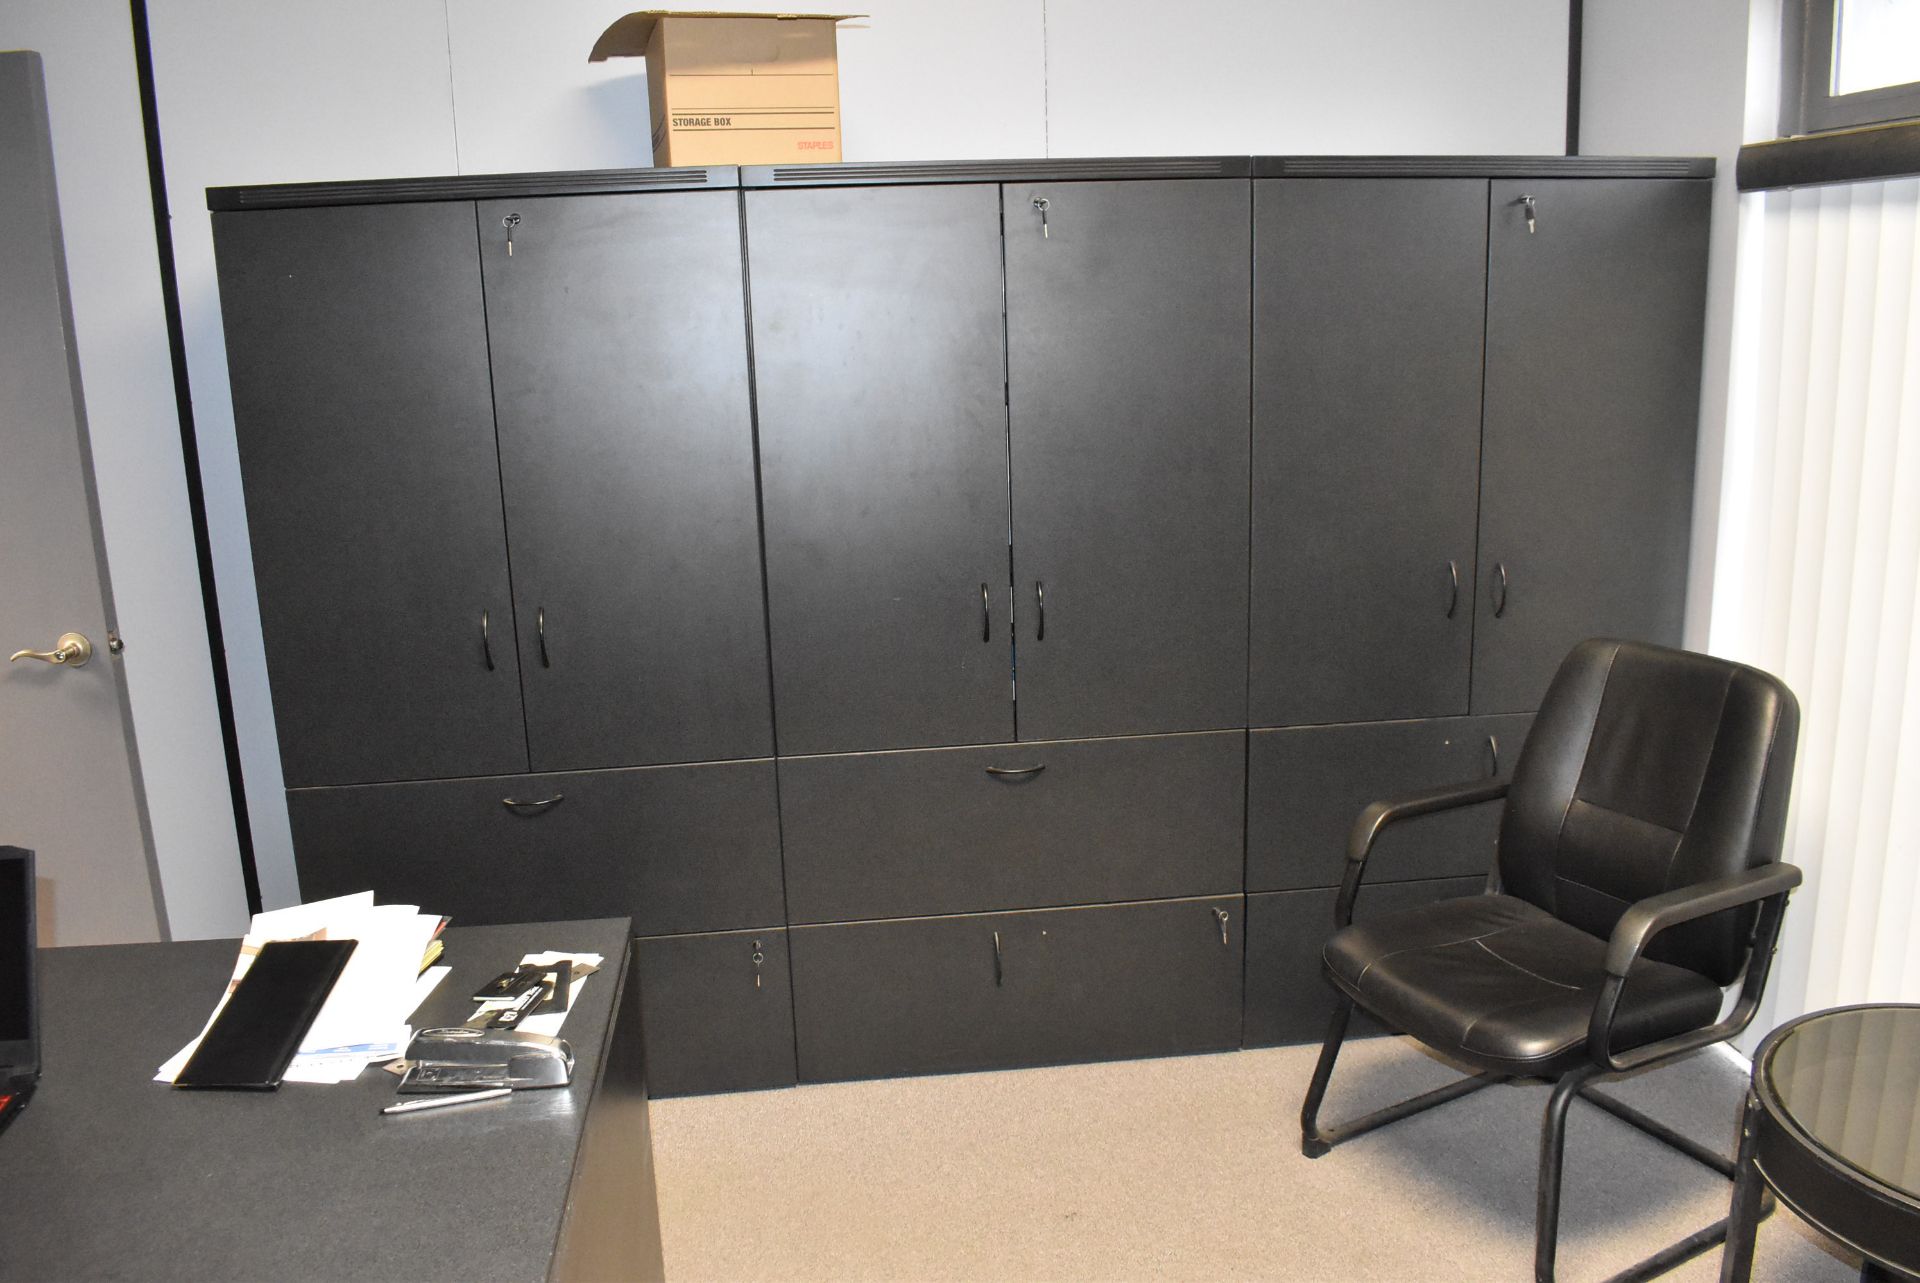 LOT/ CONTENTS OF OFFICE L-SHAPE DESK, CHAIRS, AND CABINETS (NO COMPUTERS OR ELECTRONICS) - Image 4 of 4